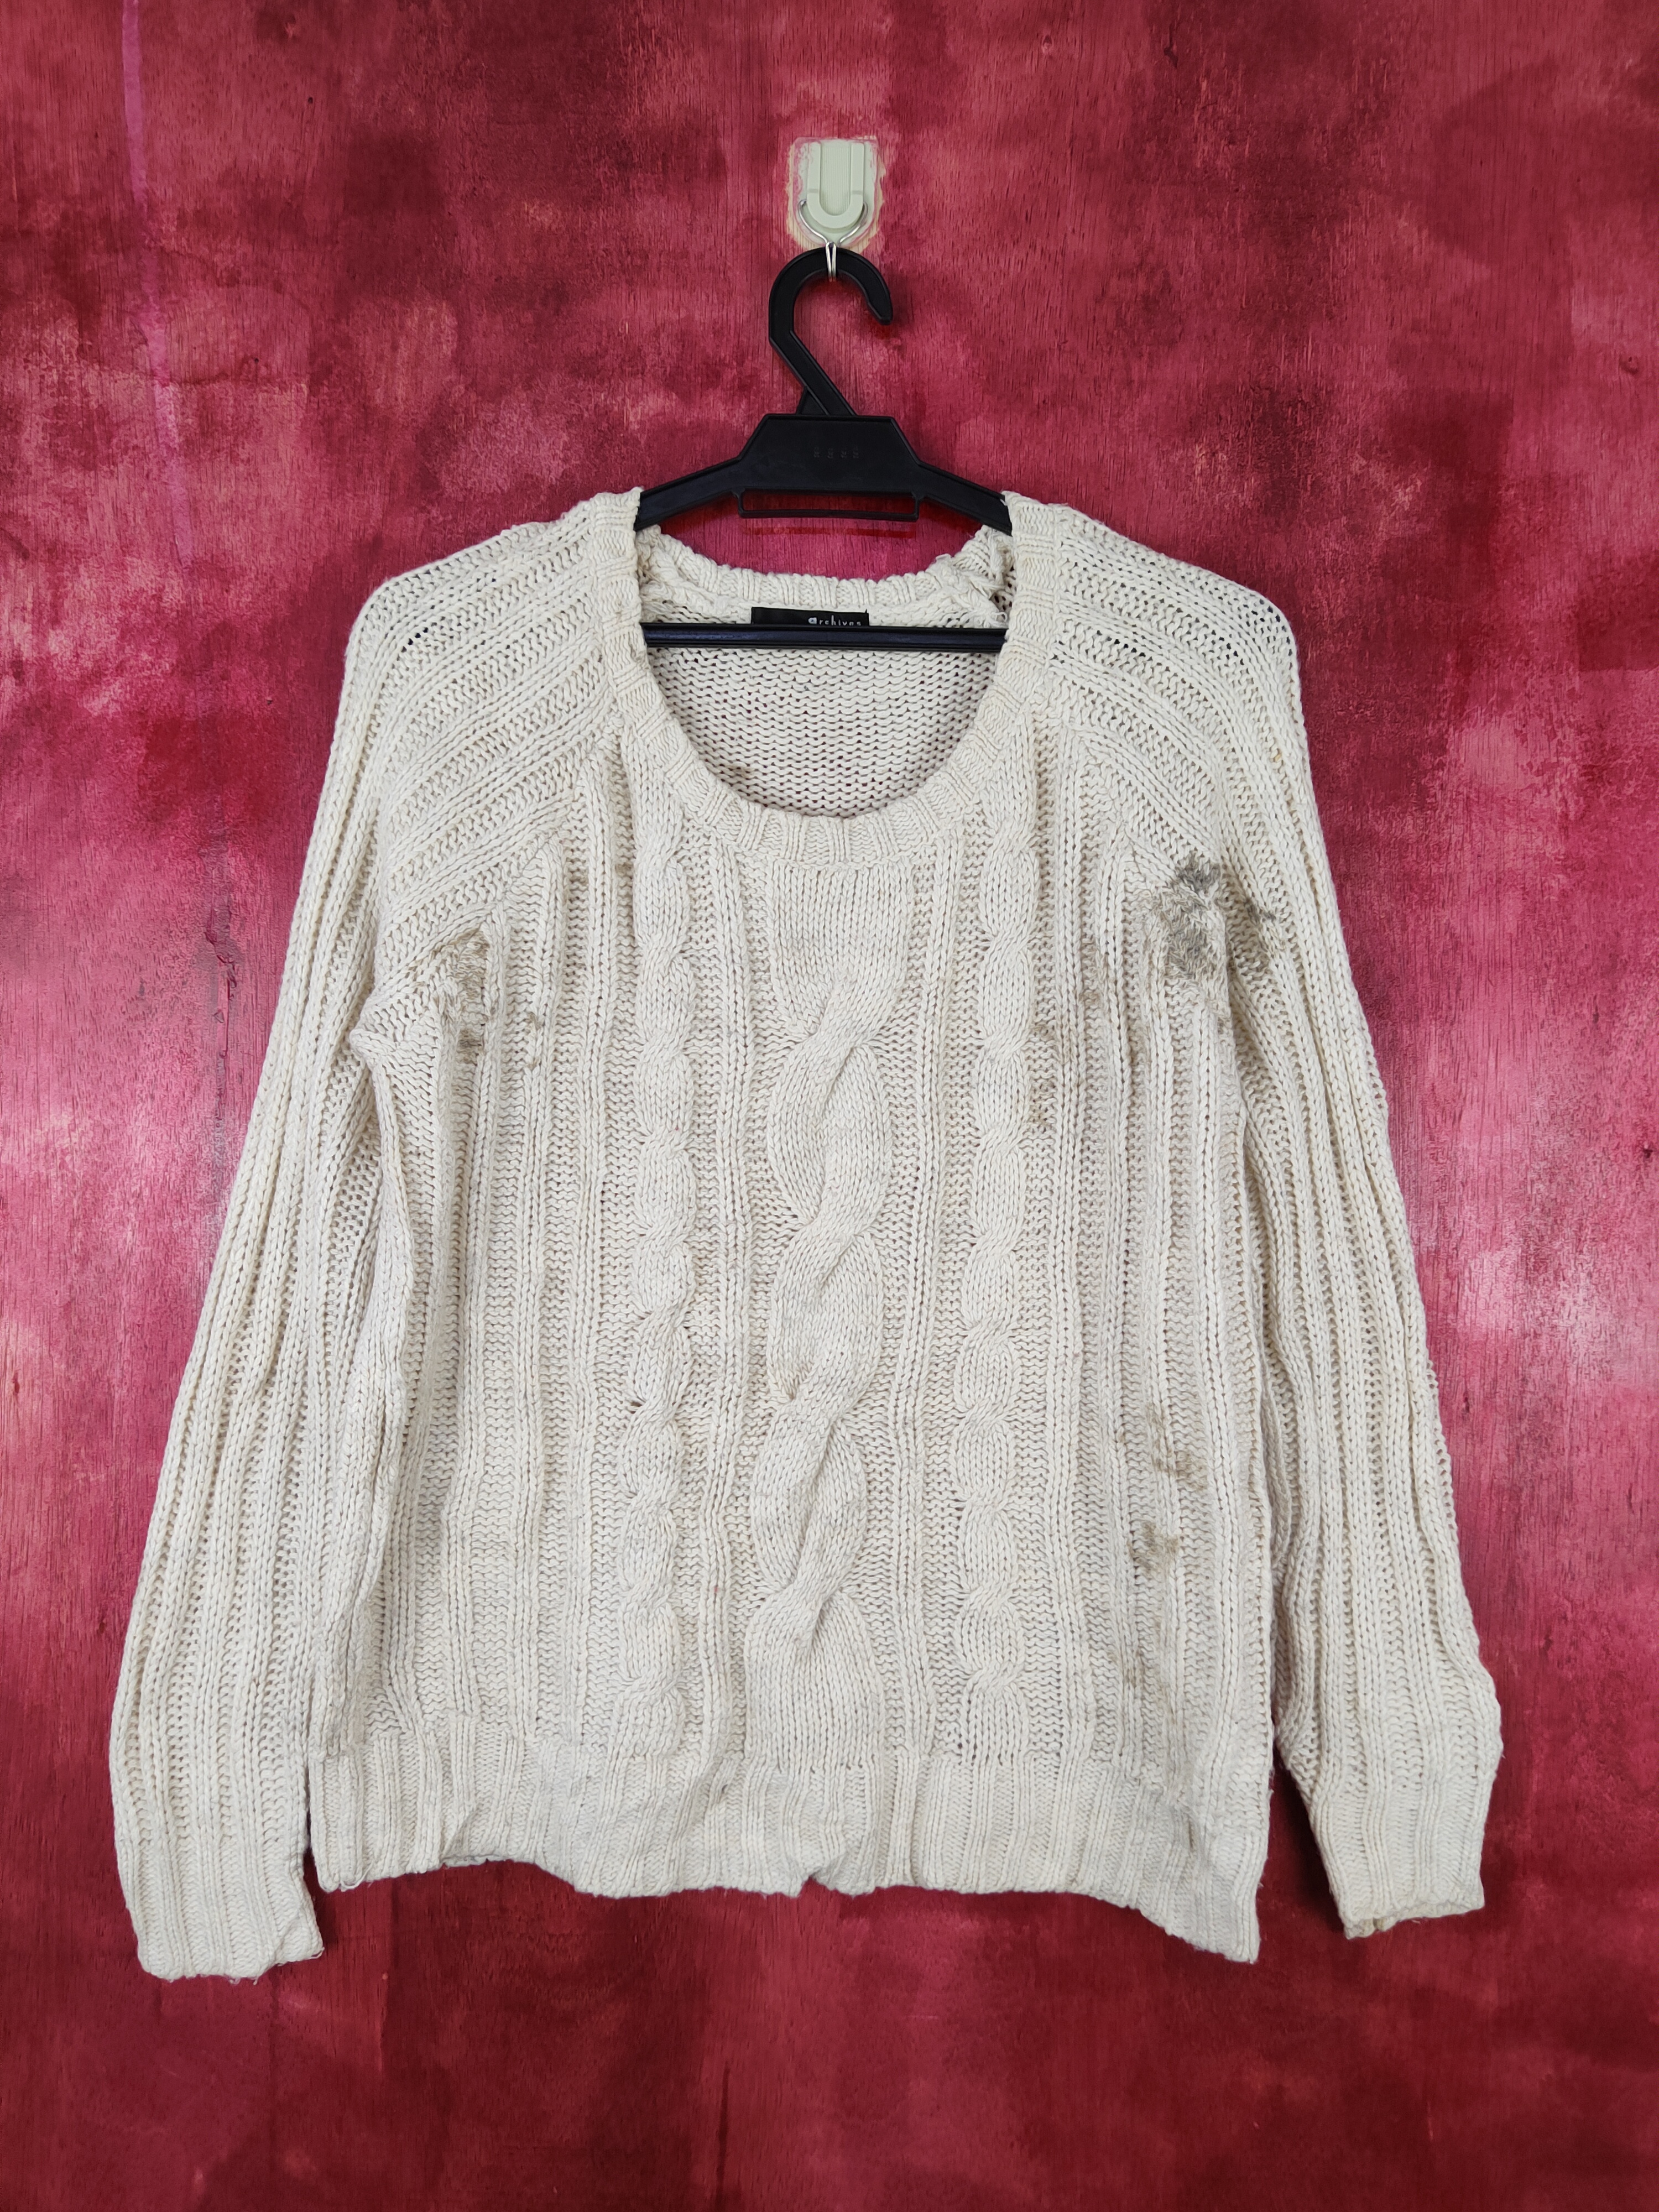 Japanese Brand - Archives White Knitwear Sweater Damage With Stain - 1